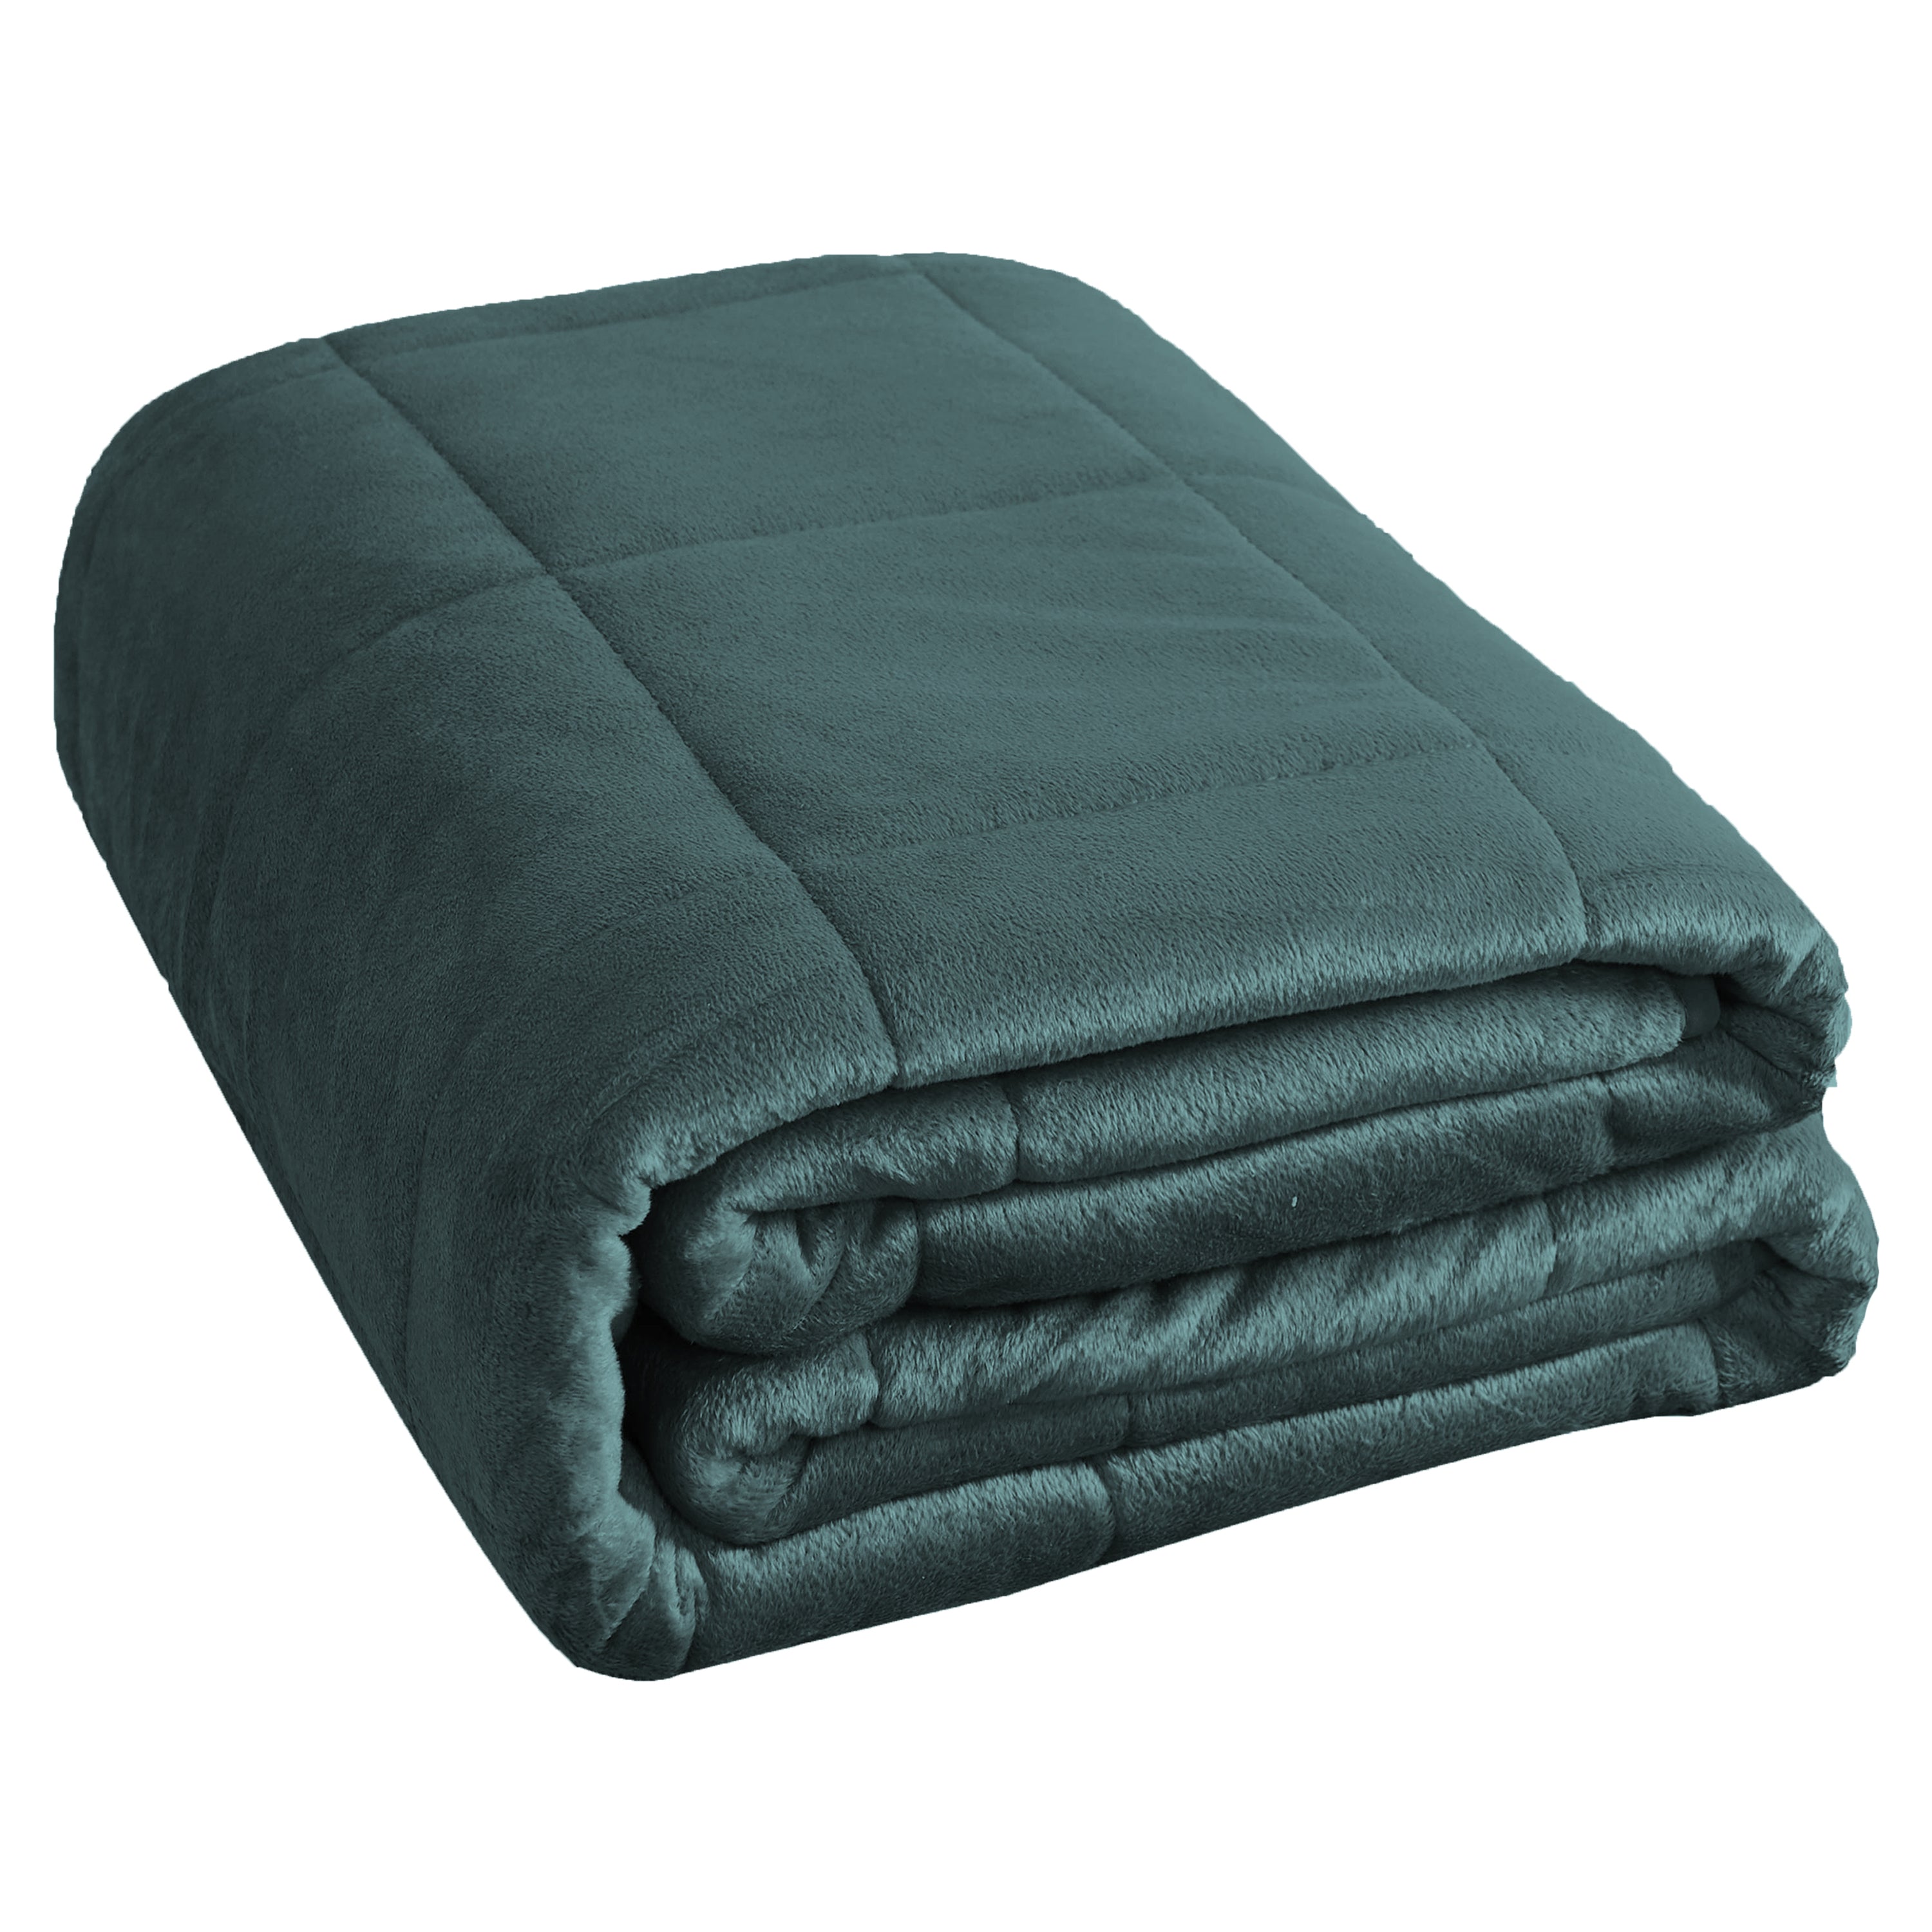 Plush Mink Weighted Oversized Blanket 15 & 20 lb